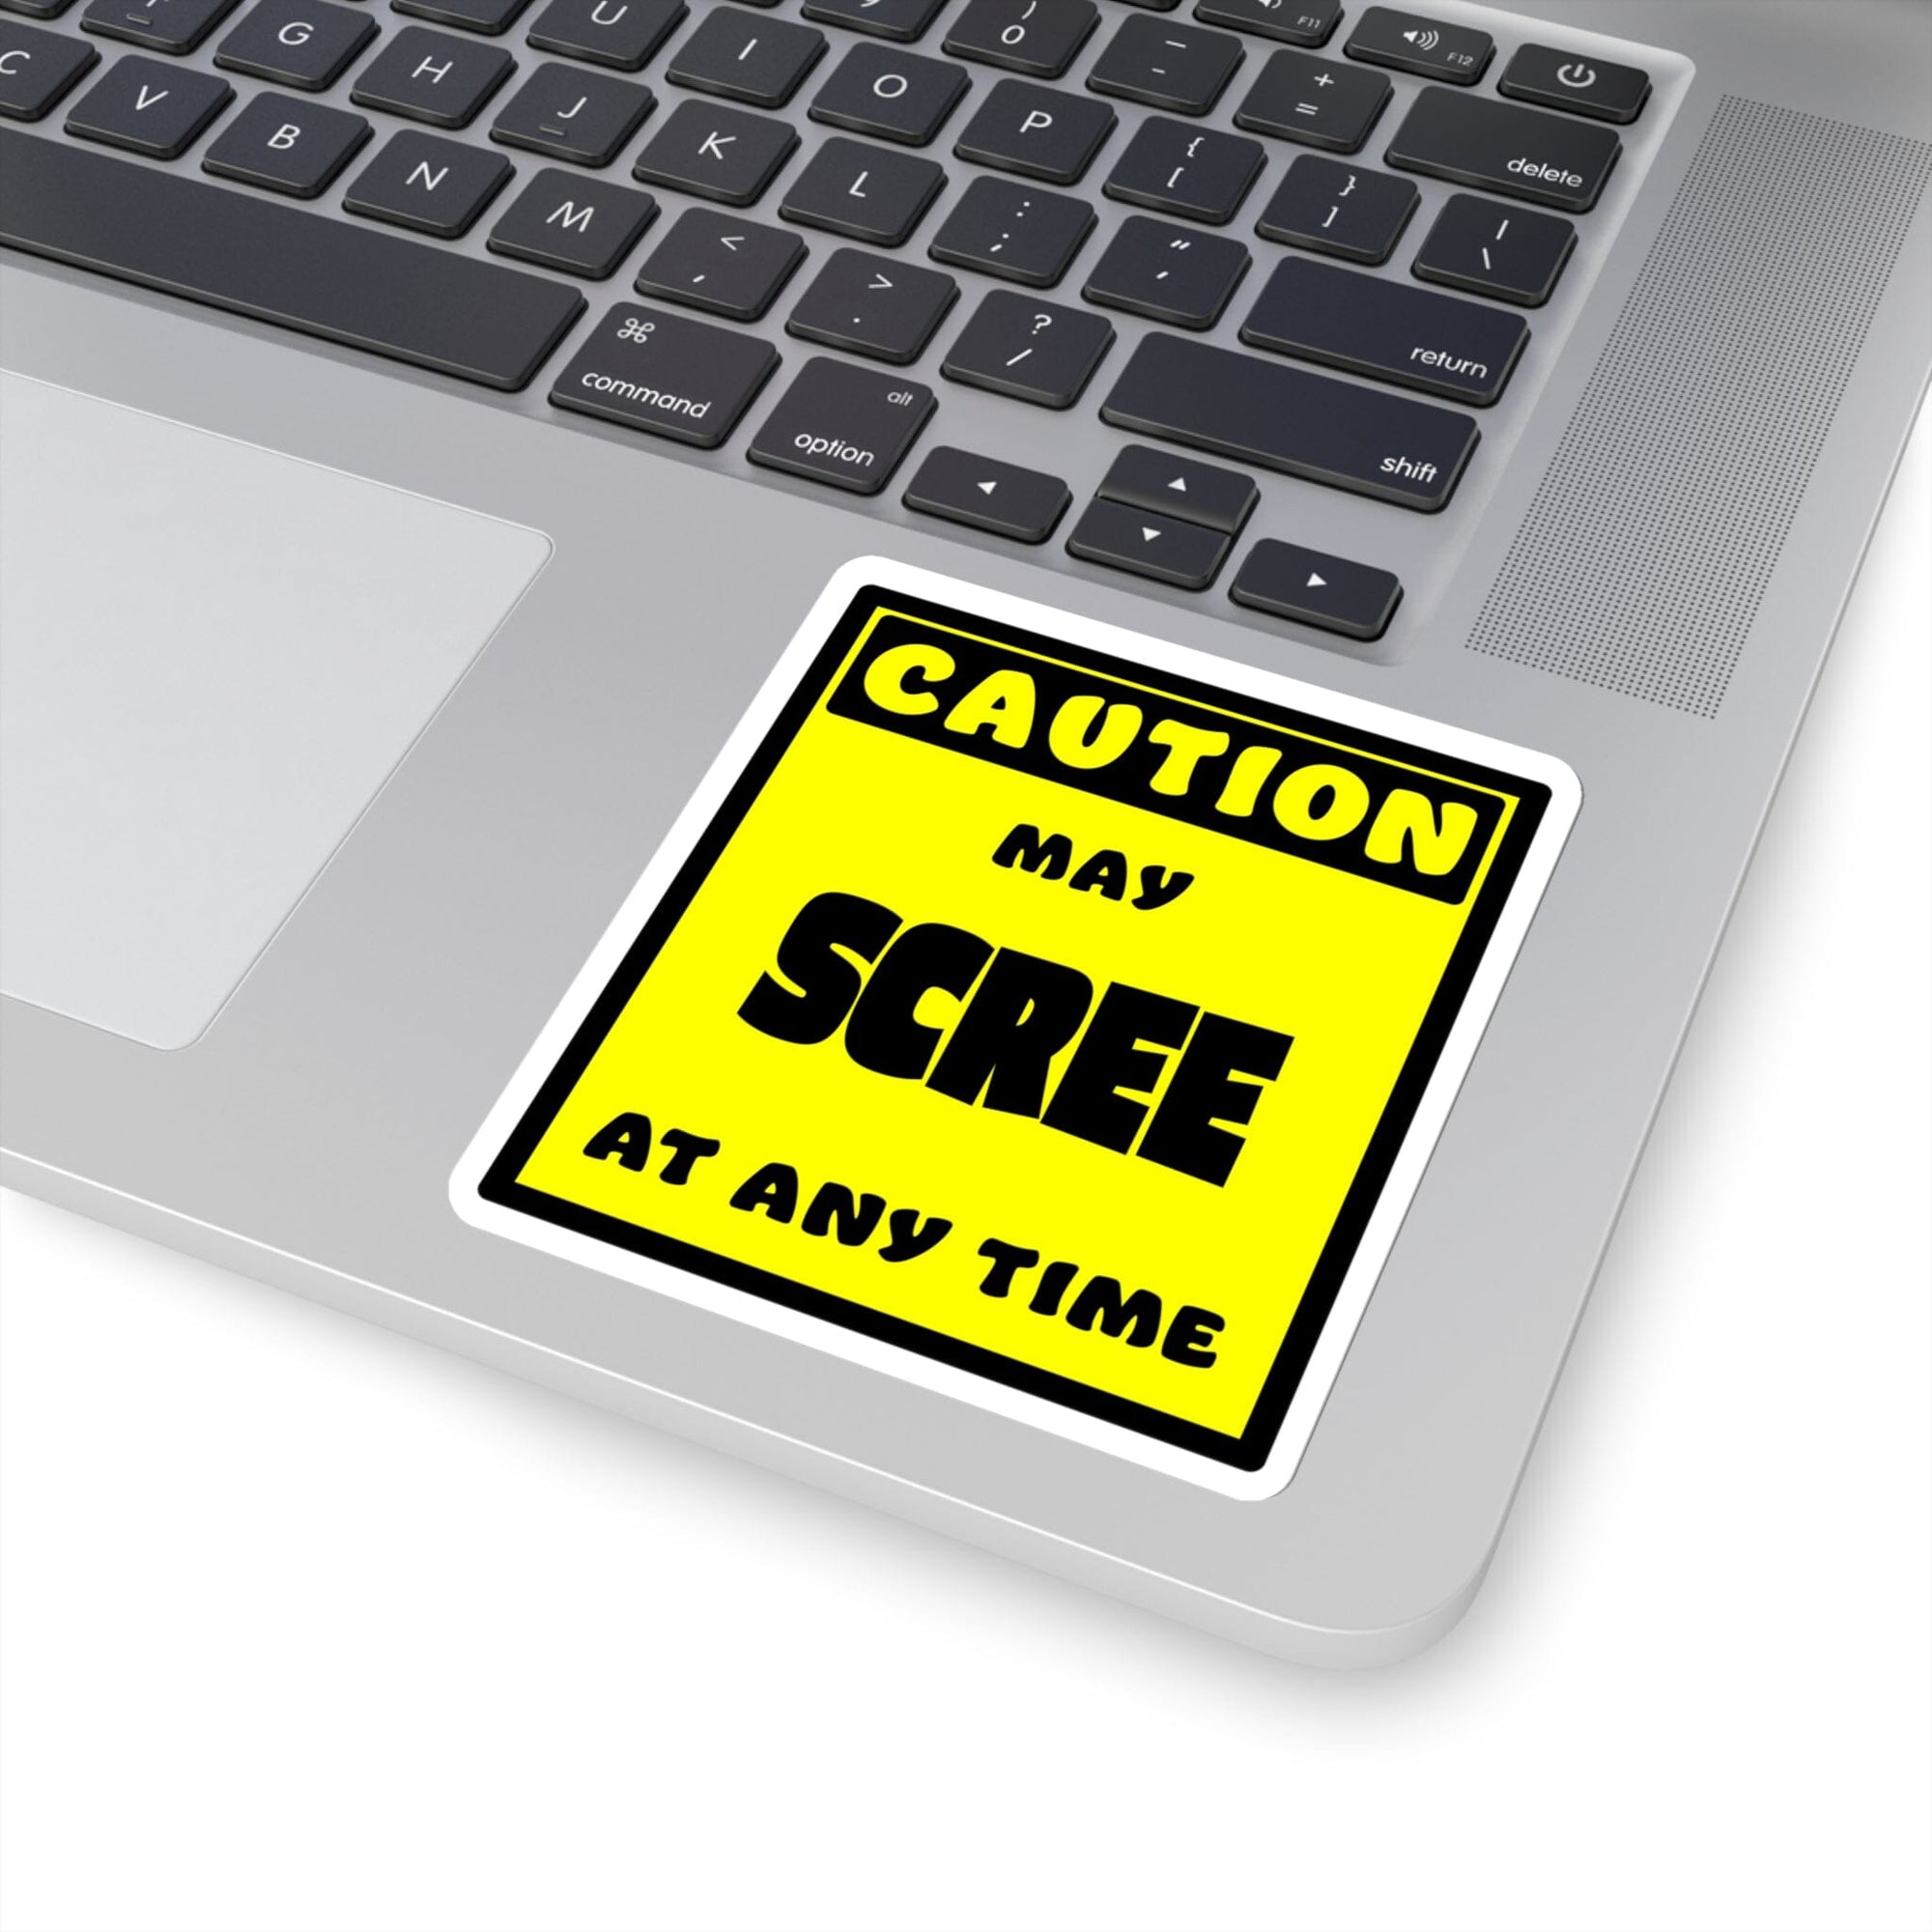 CAUTION! May SCREE at any time! - Sticker Sticker AFLT-Whootorca 